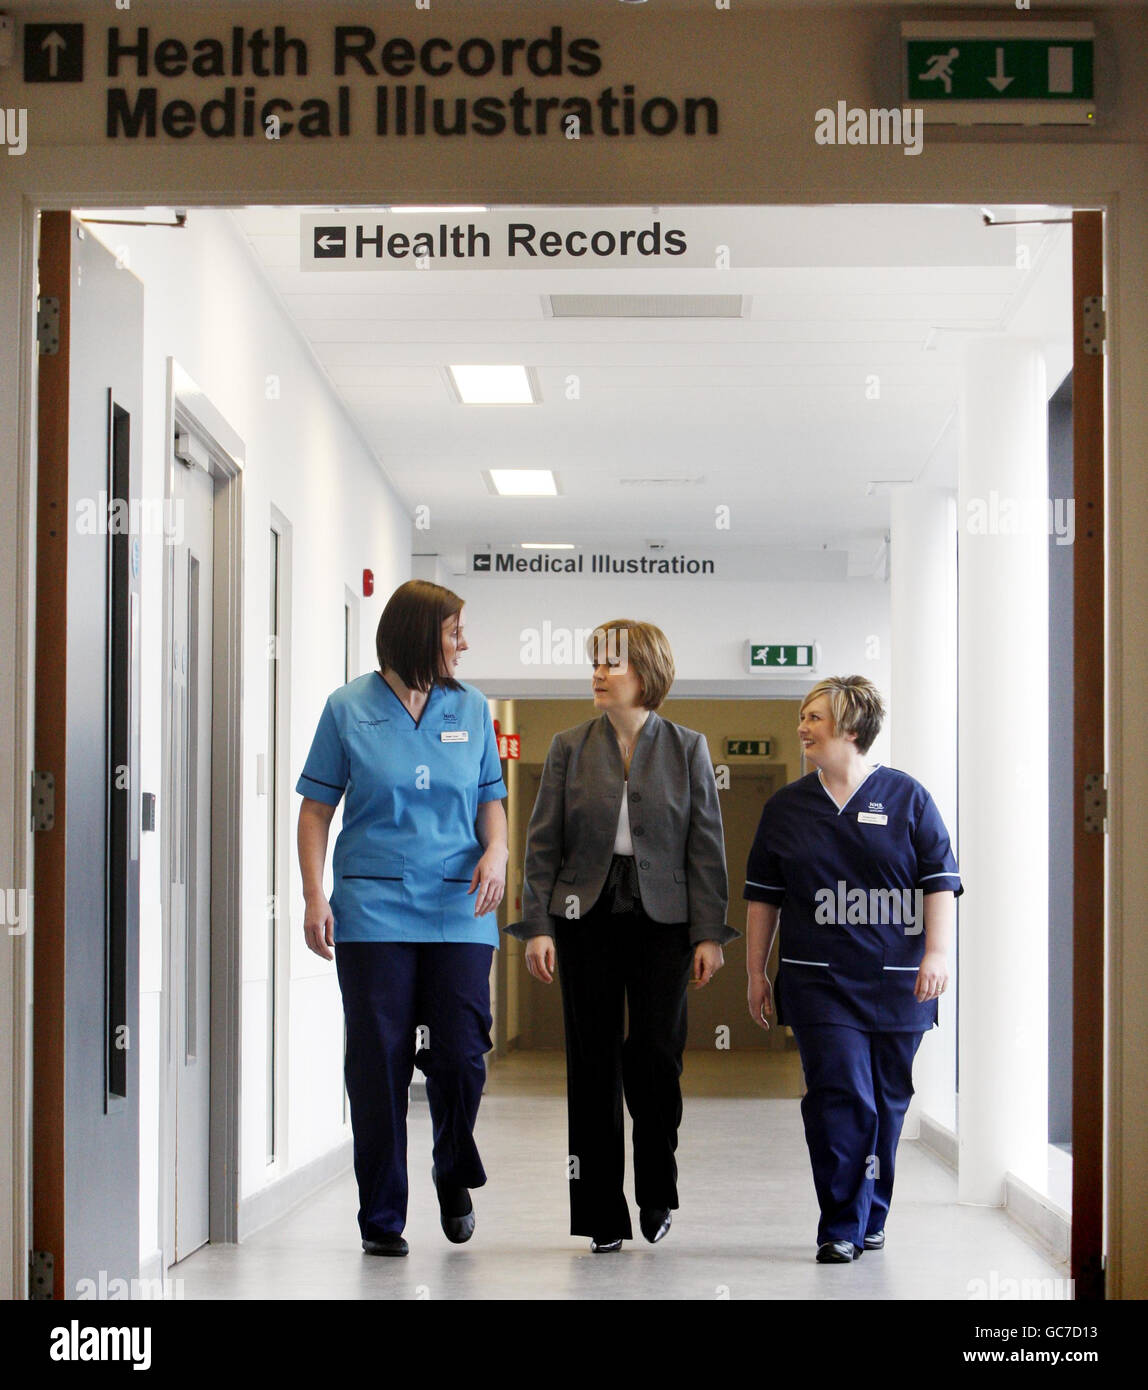 Health Secretary Nicola Sturgeon (centre) chats with Speech and Language Therapist Natalie Turner (left) and Senior Charge Nurse Pamela Burns (right), who are wearing their new national uniforms, during a visit to the New Stobhill Hospital in Glasgow to launch of the new NHS Scotland national uniforms. Stock Photo